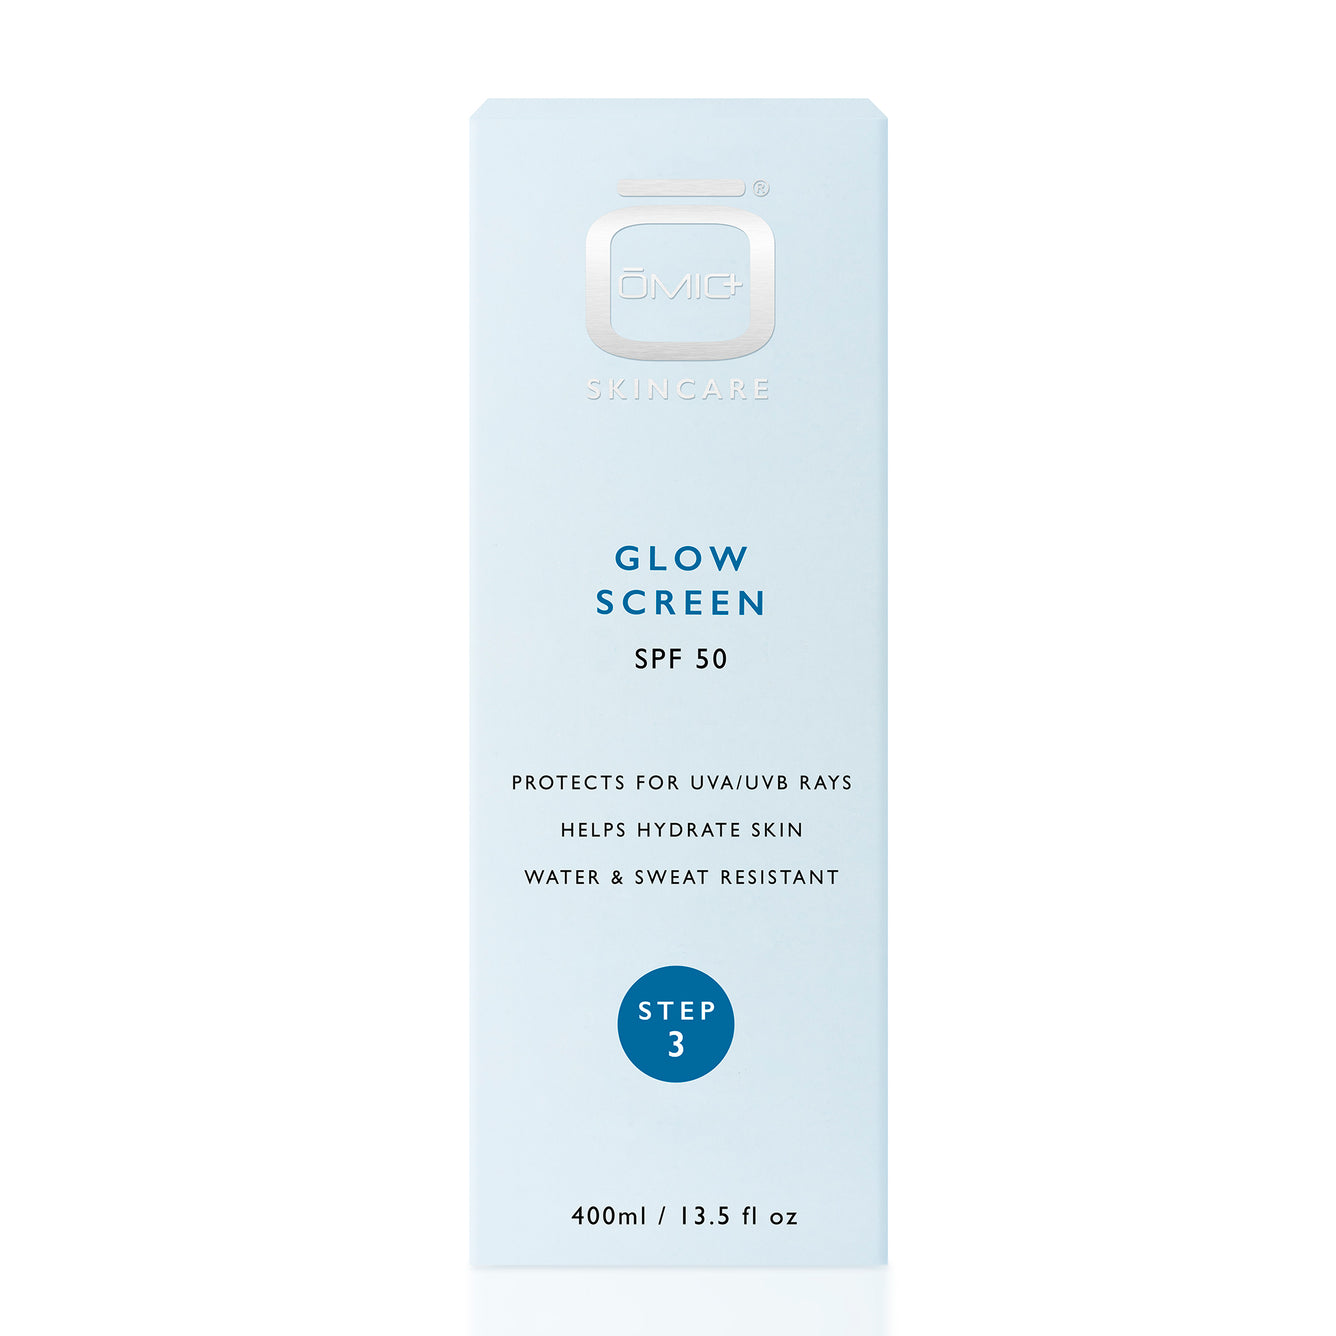 Omic+ Glow Screen-400ml - STEP 3 Mitchell Brands - Mitchell Brands - Skin Lightening, Skin Brightening, Fade Dark Spots, Shea Butter, Hair Growth Products